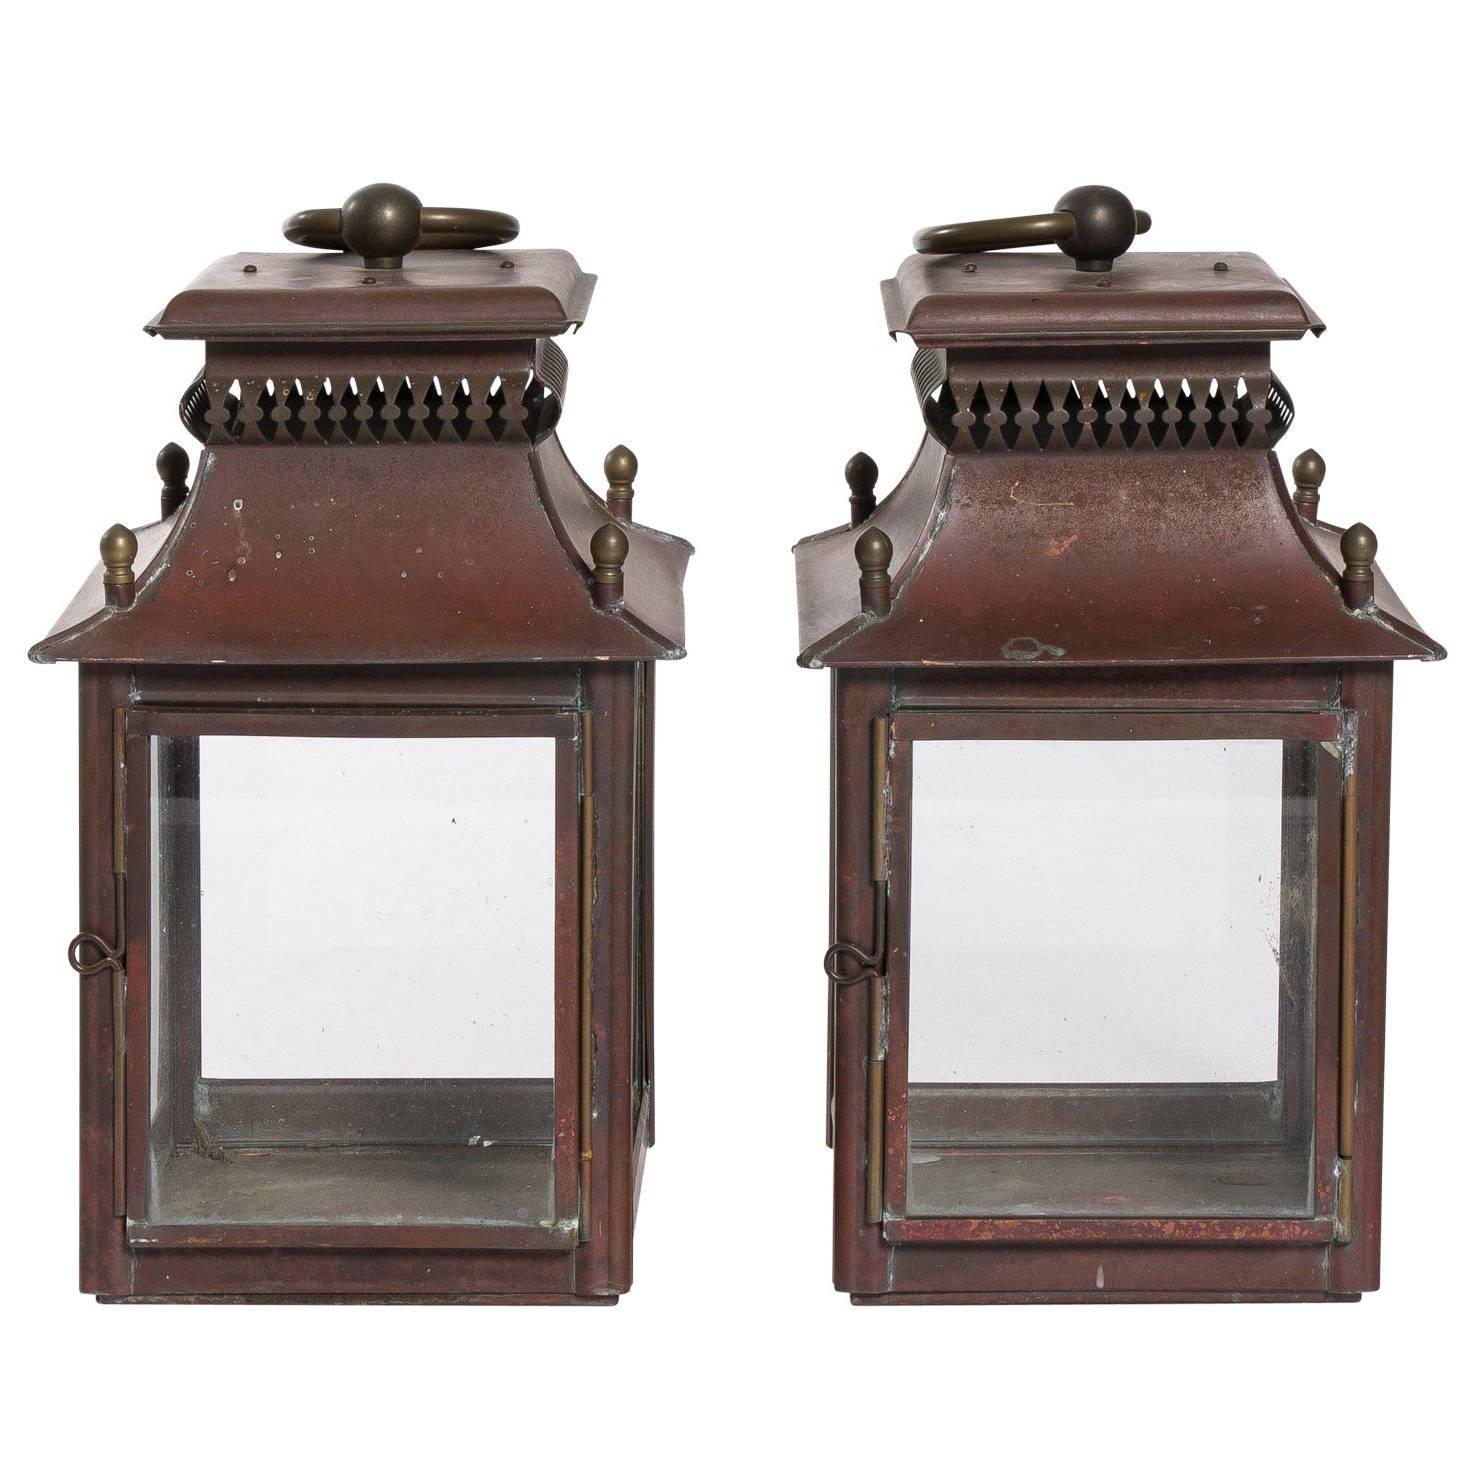 Pair of Red Tole Lanterns